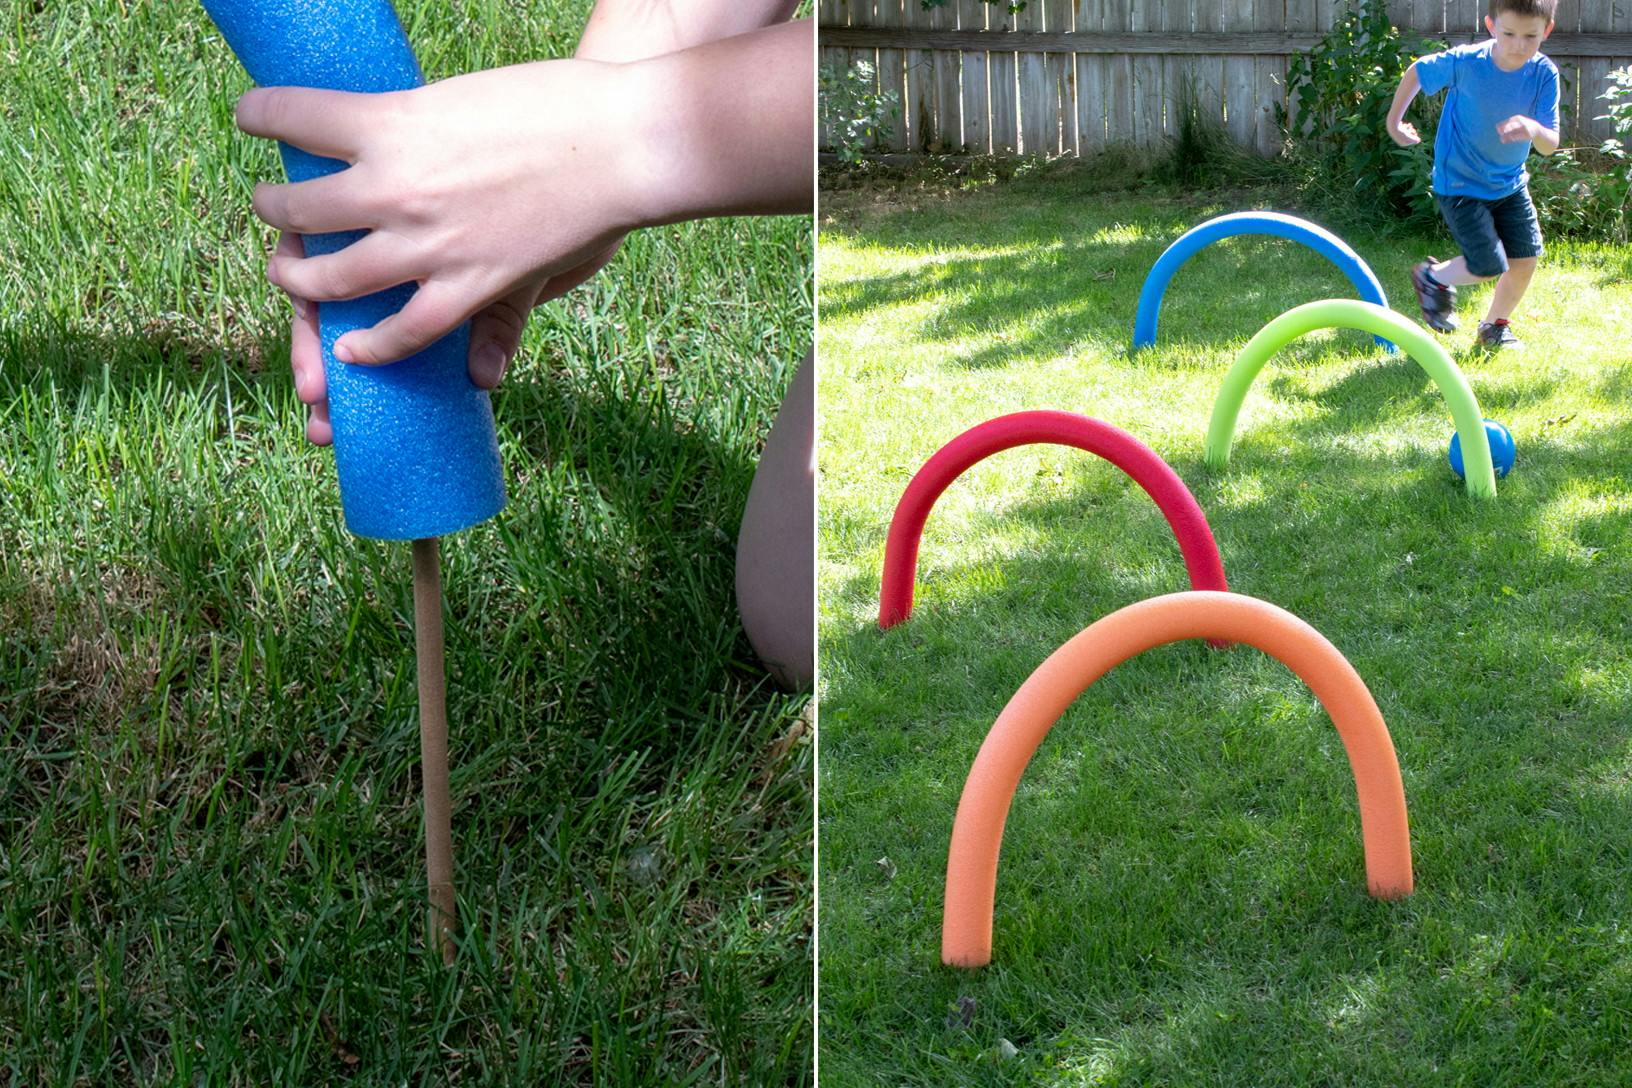 03-1-20180612-kcl-dollar-store-summer-pool-noodles-obstacle-course-1529348454.jpg?auto=compress,format&fit=max